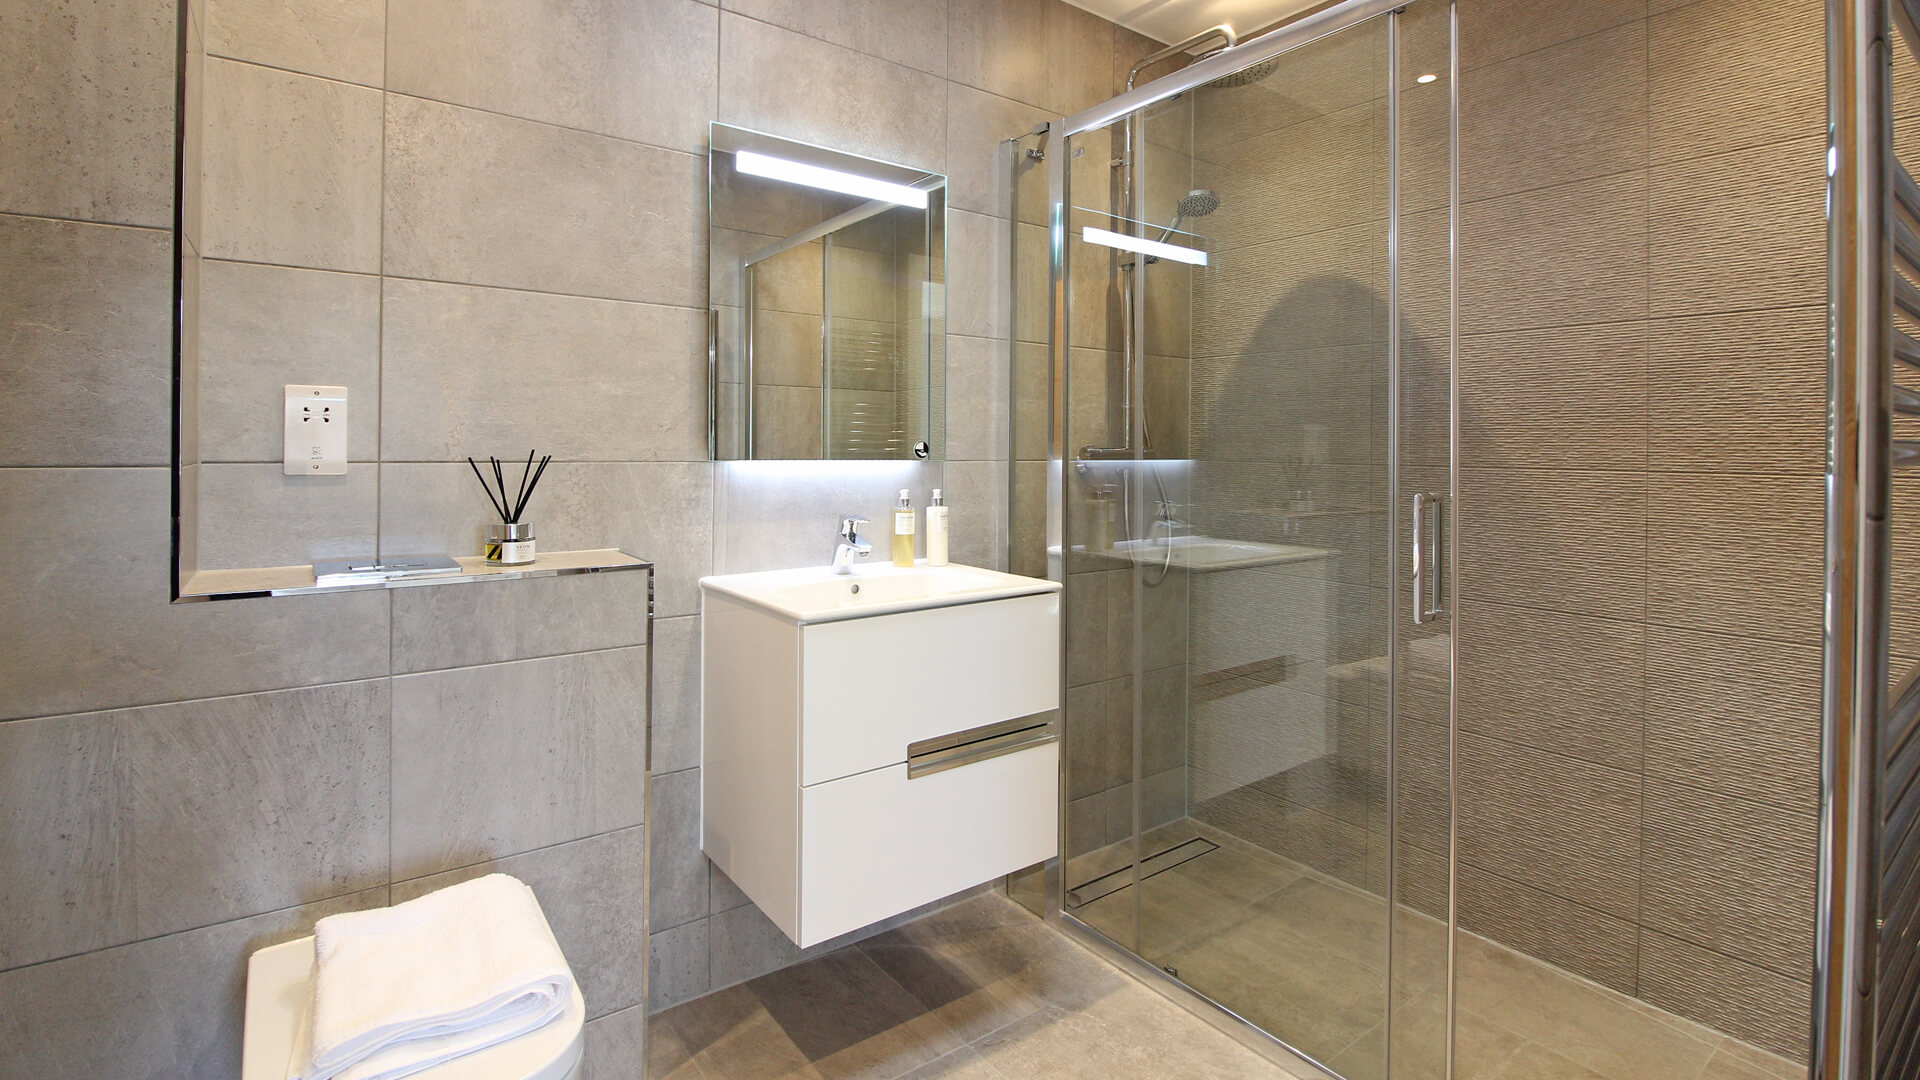 Ensuite with white vanity unit and toilet at Mulberry place.